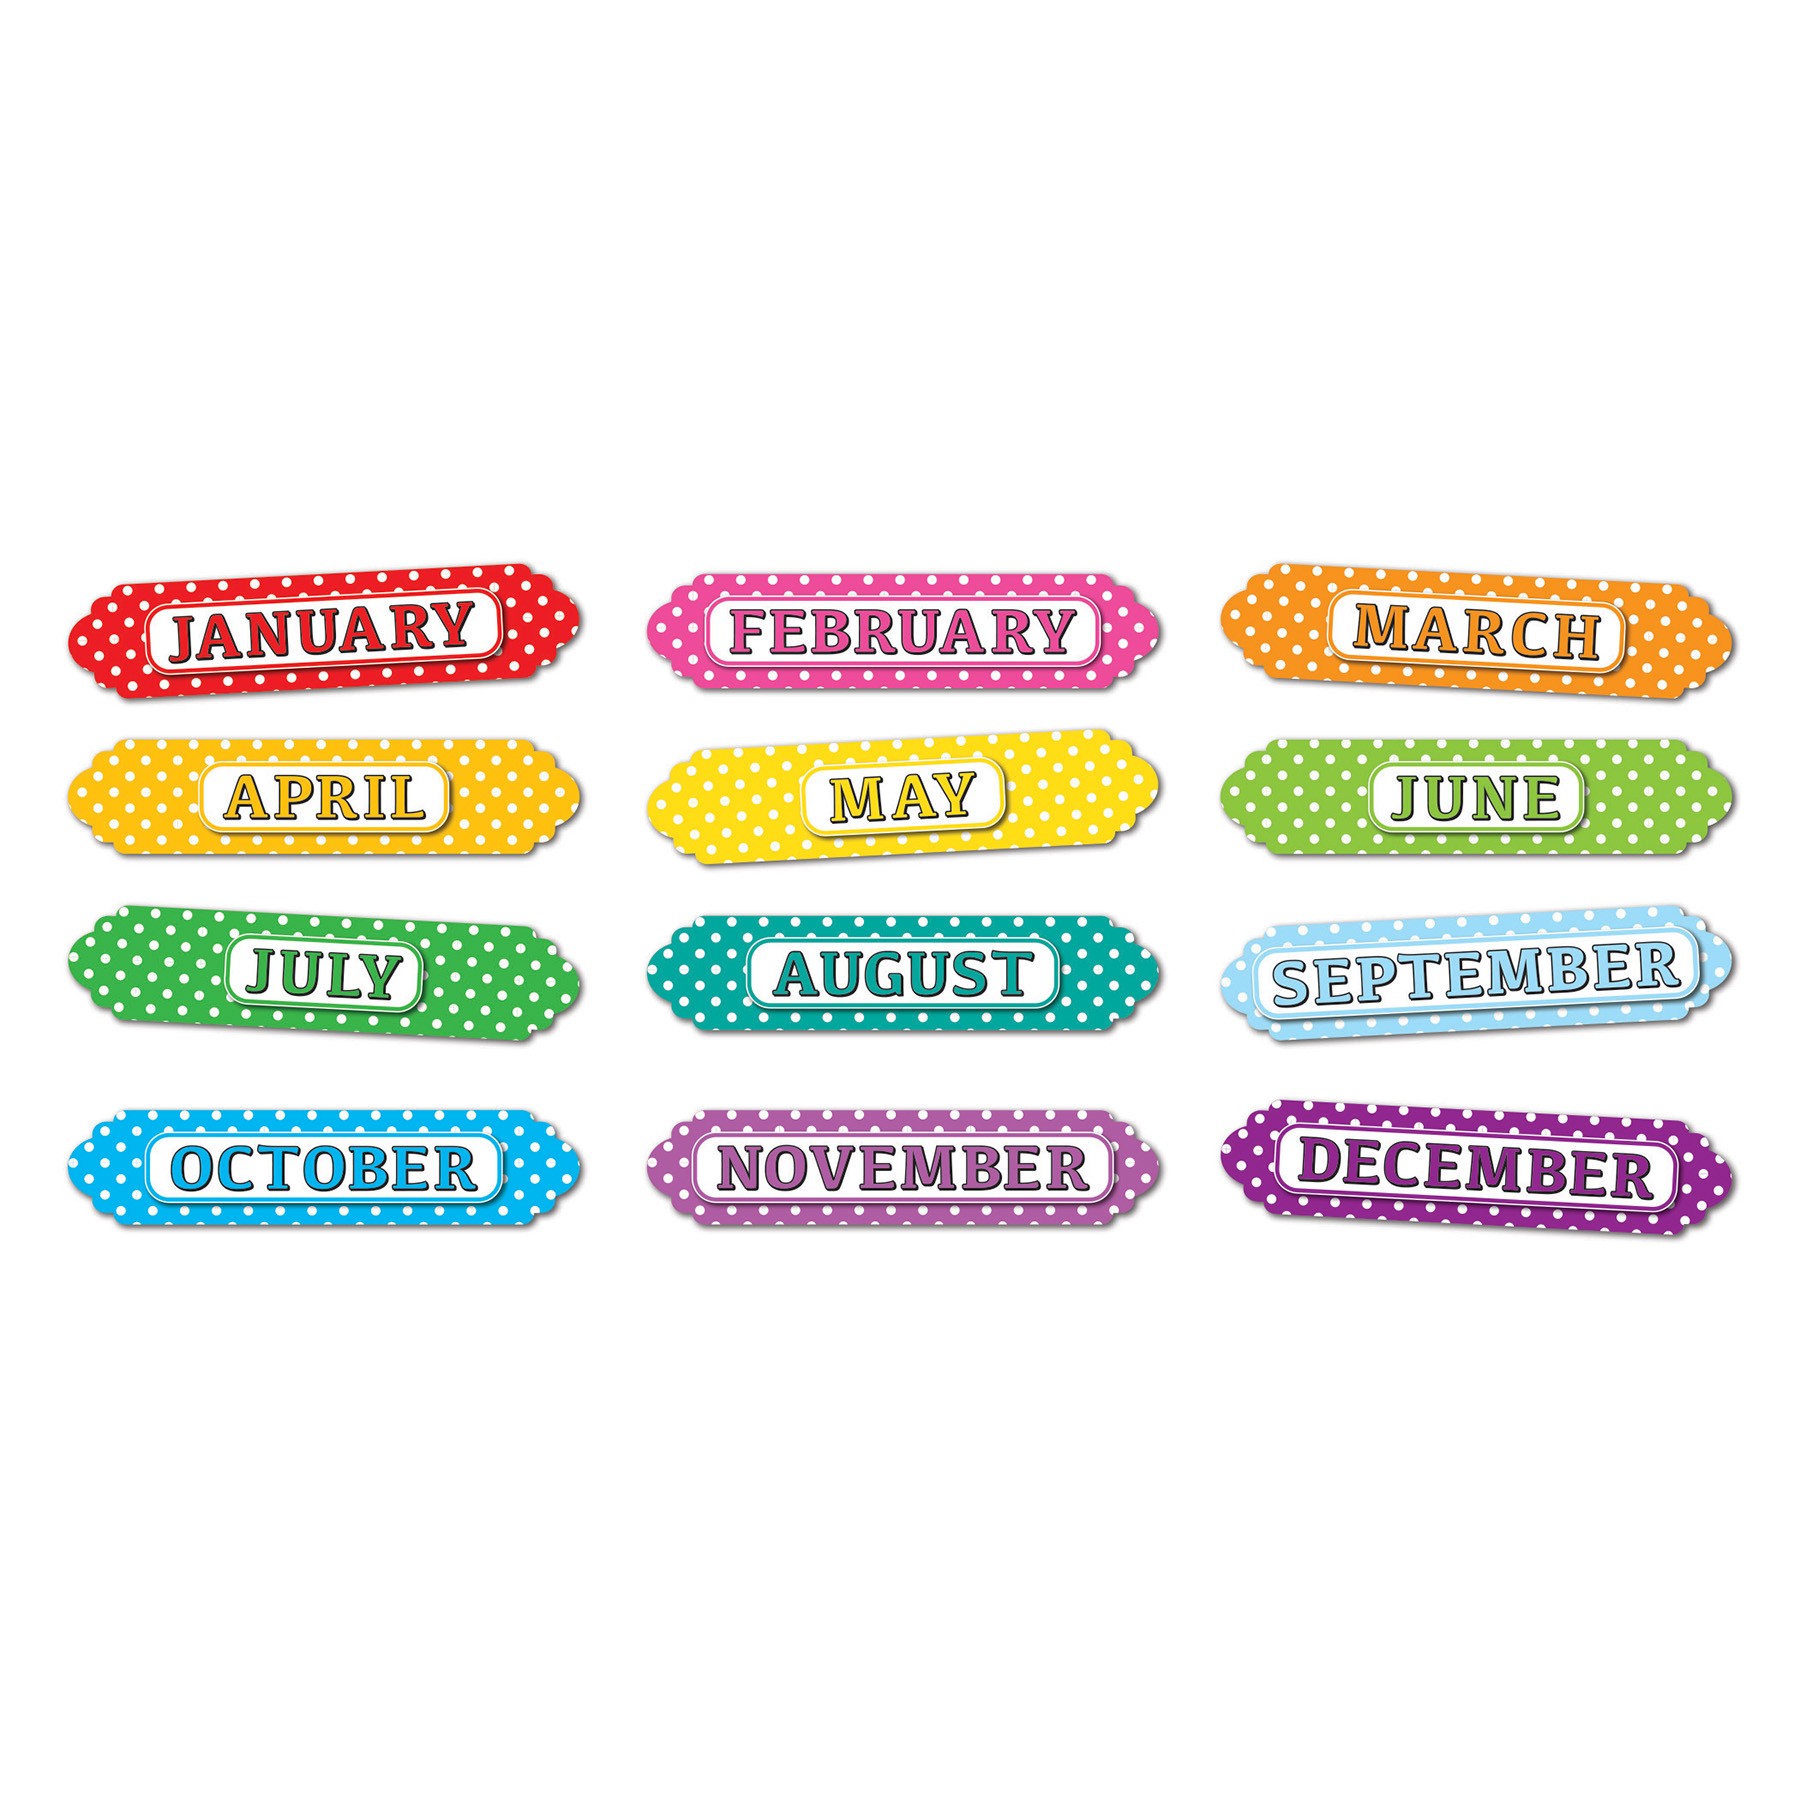 Magnetic Die-Cut Timesavers & Labels, Months of the Year, White Polka Dots On Assorted Colors, 12 Pieces